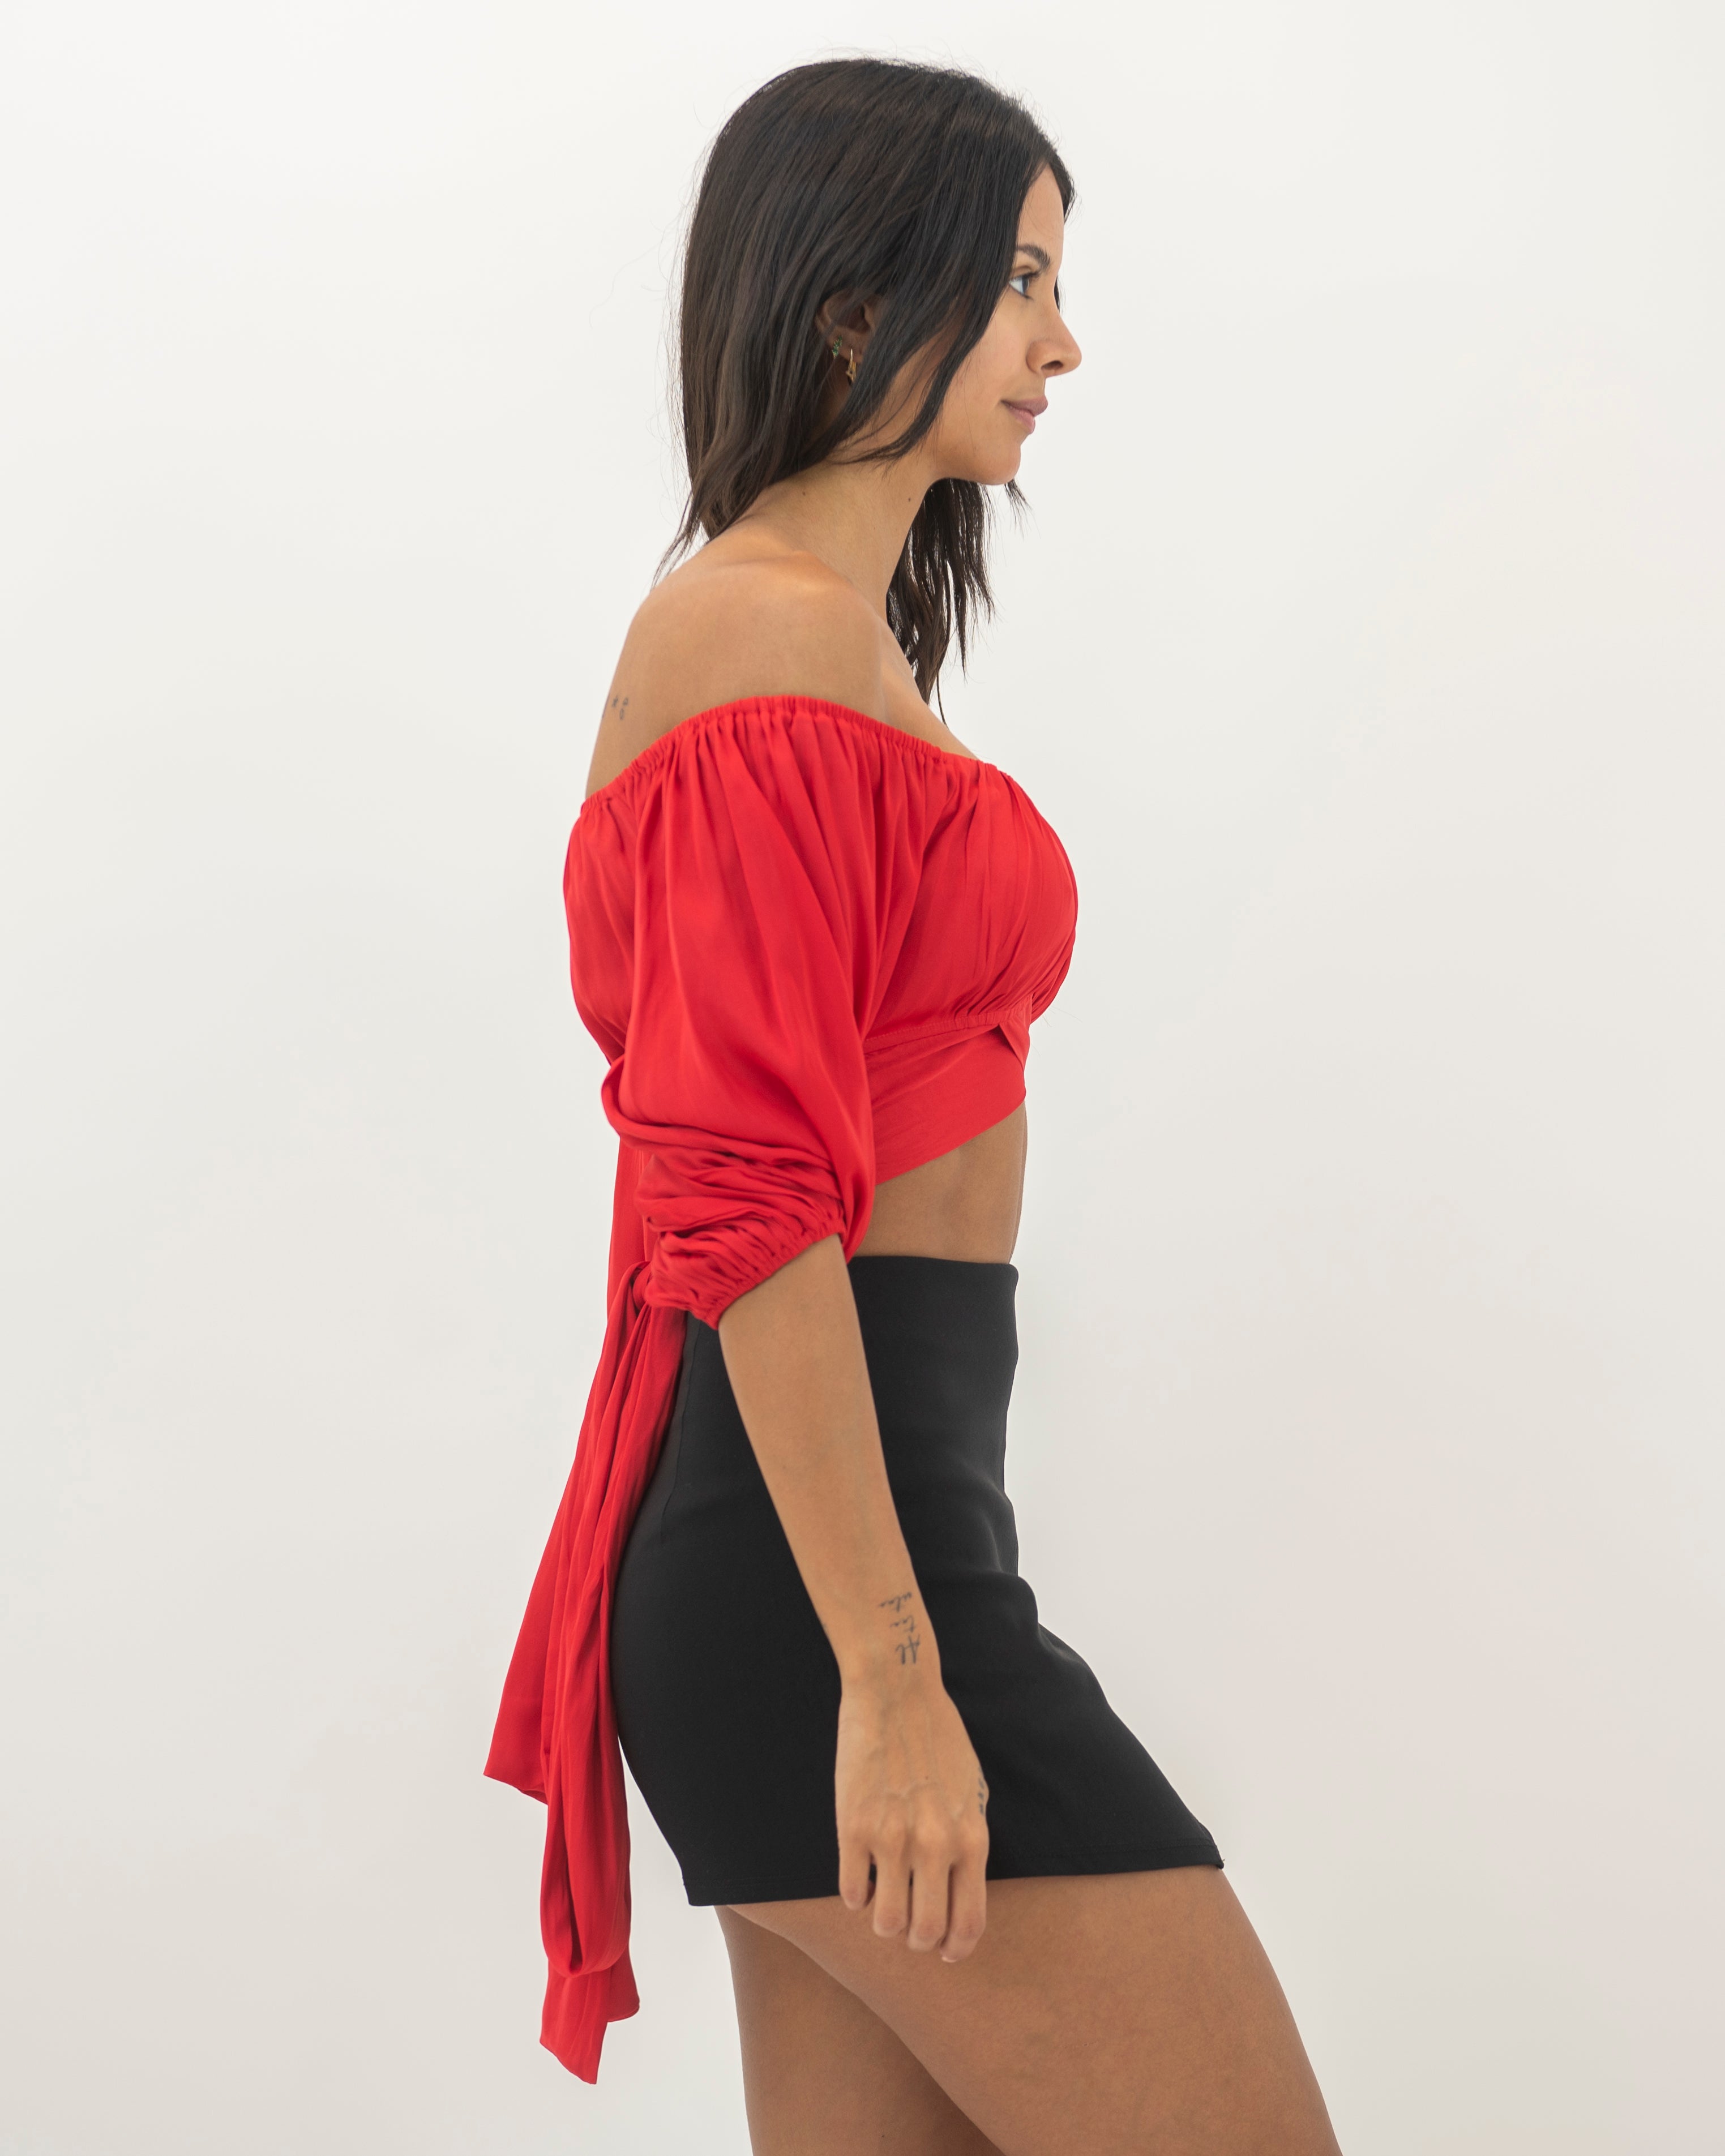 Elegant Off Shoulder Red Satin Tie-Up Ruffle Crop Top with Bell Sleeve